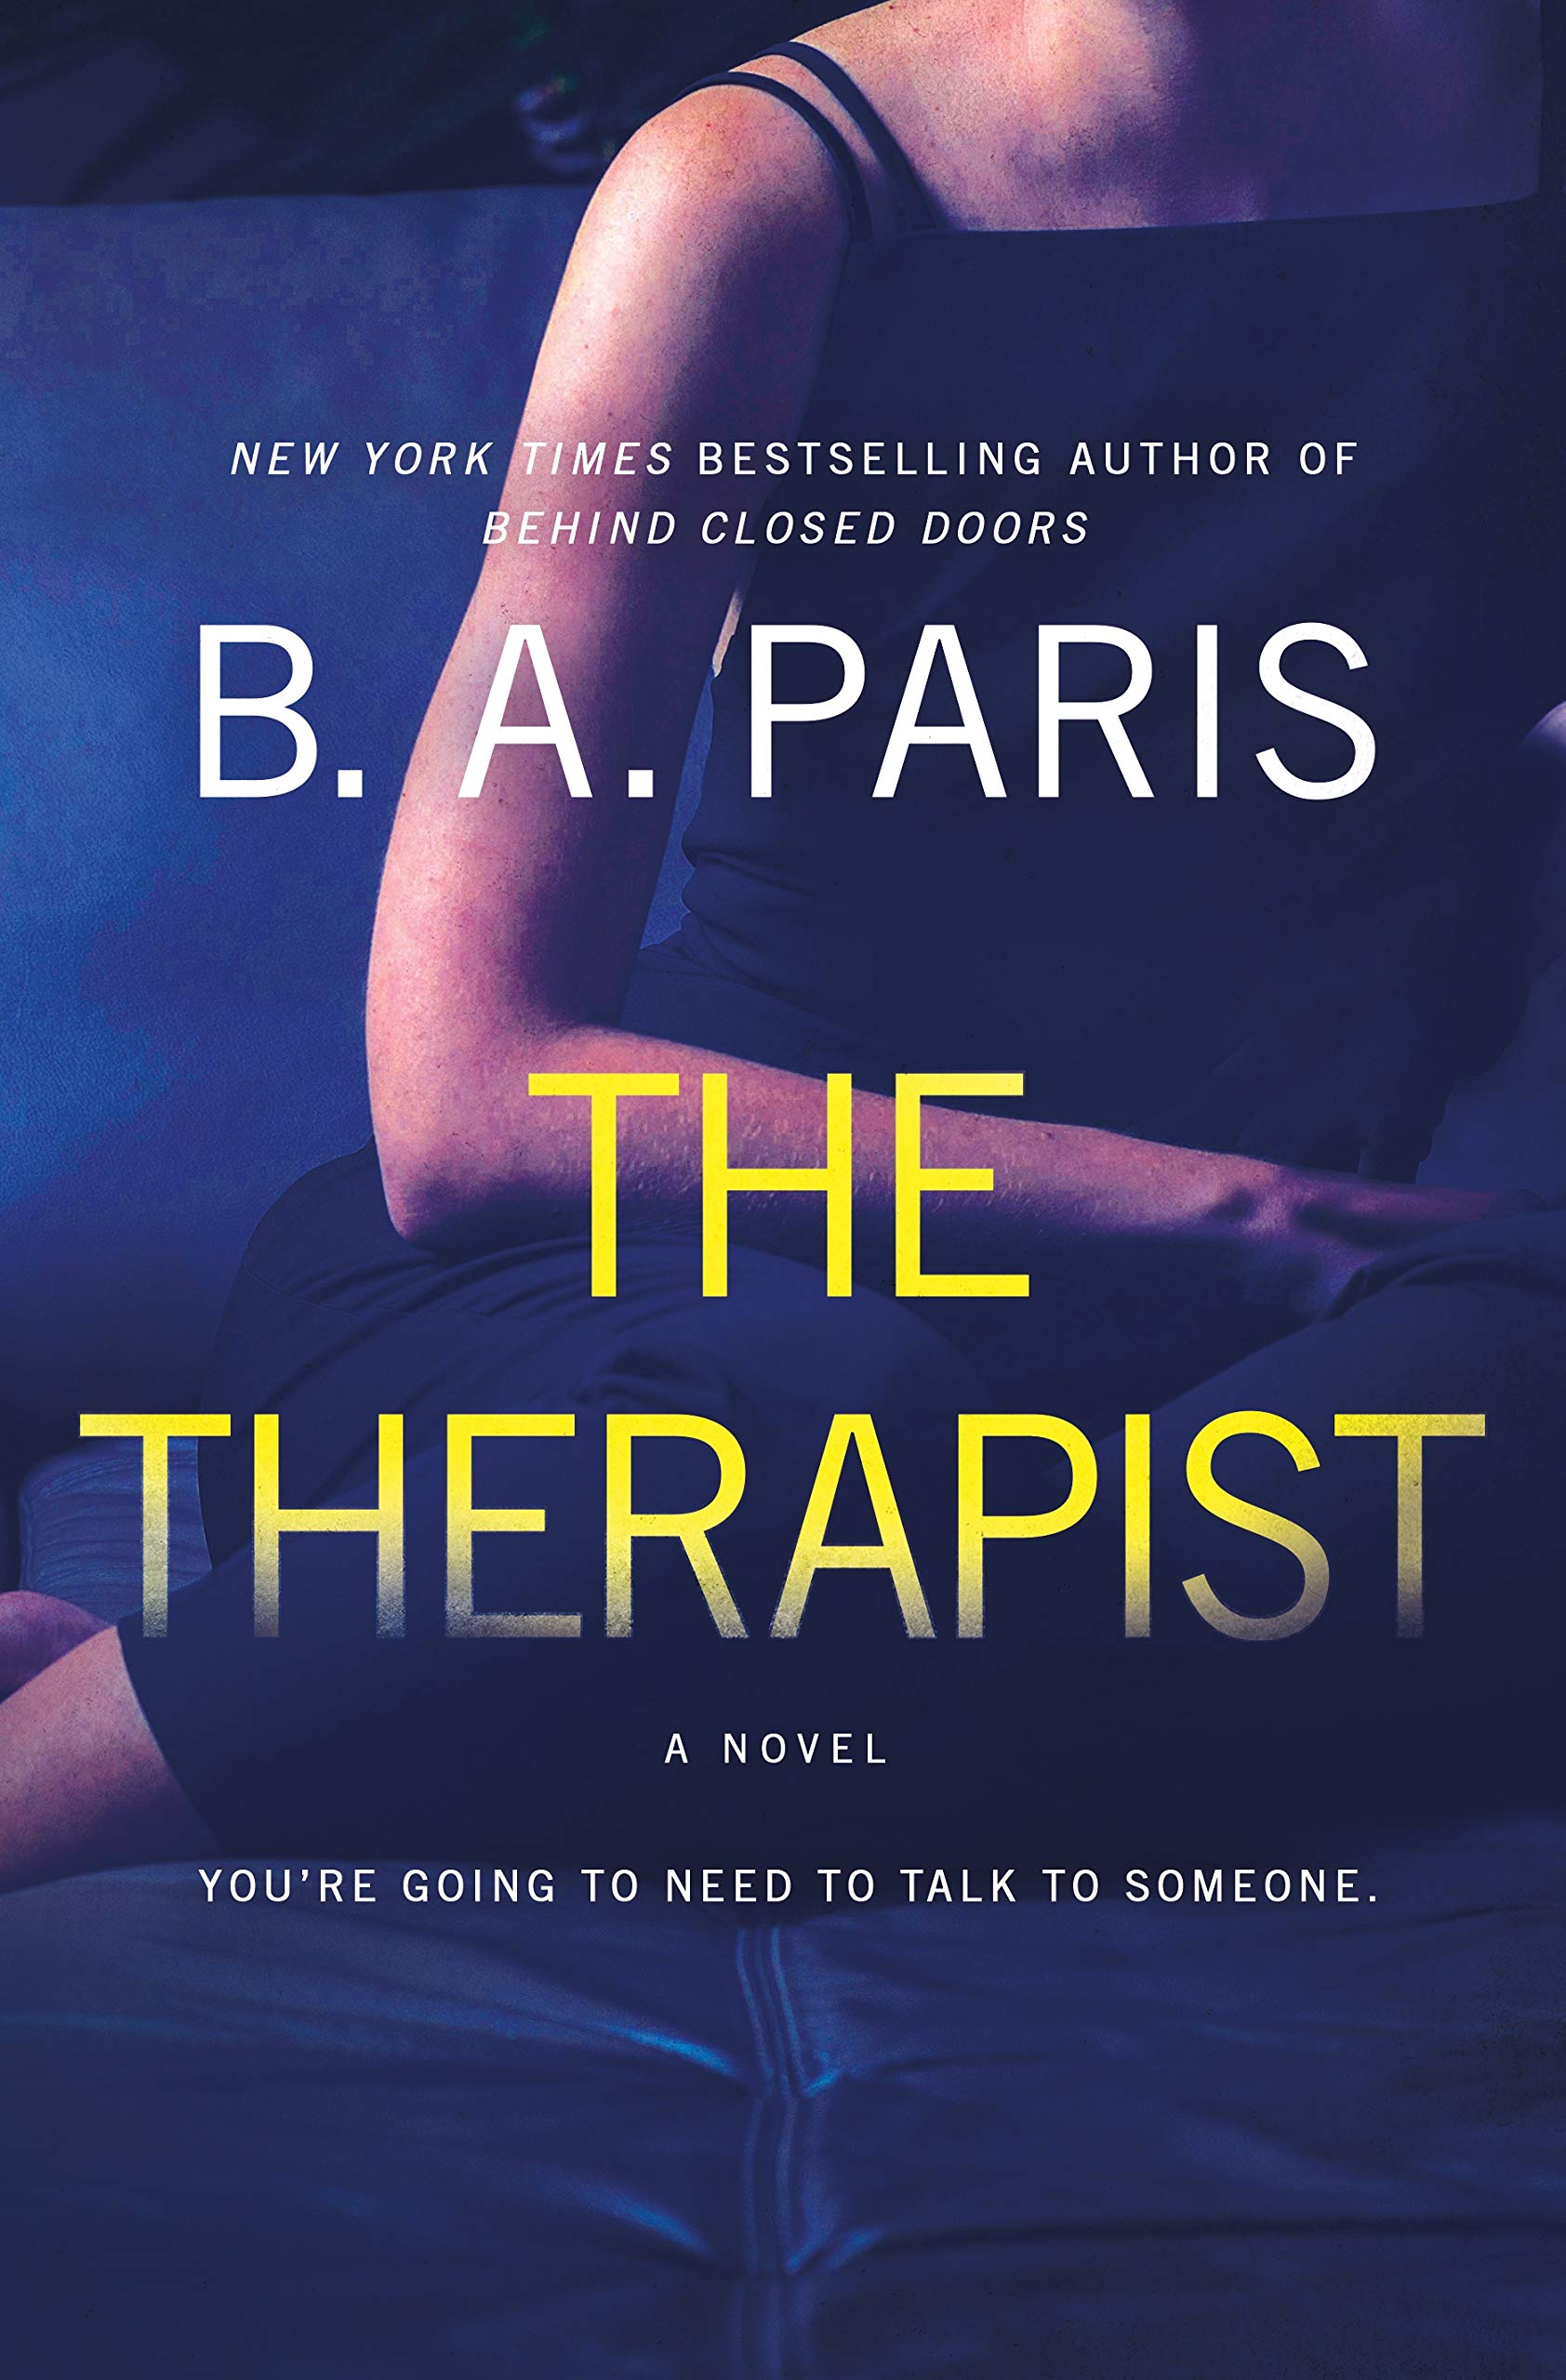 The Therapist by B.A. Paris book review